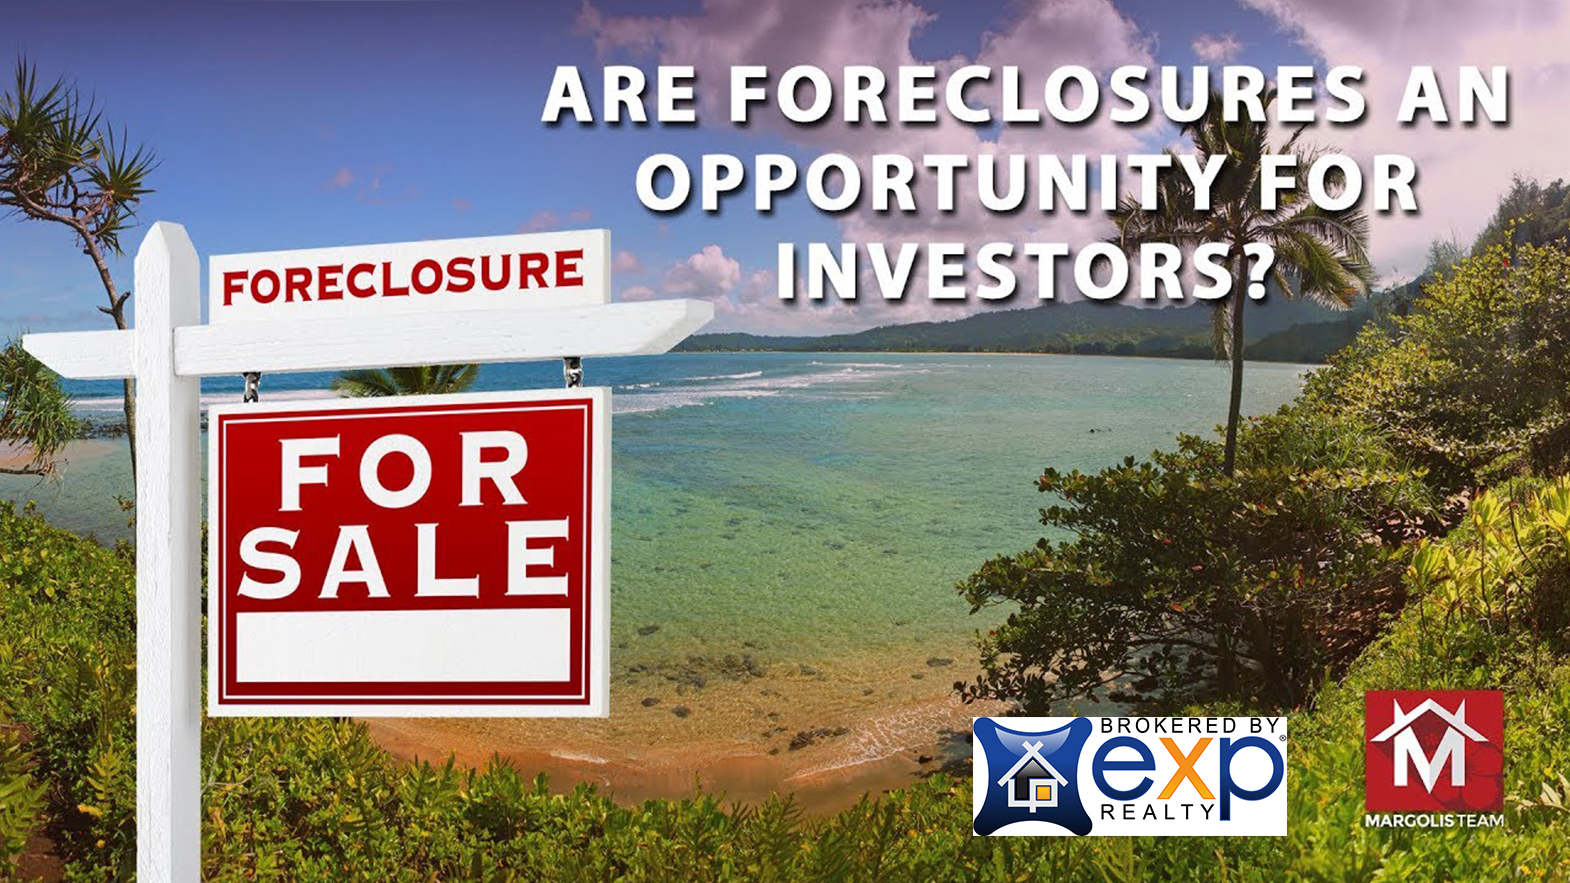 Investors: Have You Considered Purchasing a Foreclosure Property?